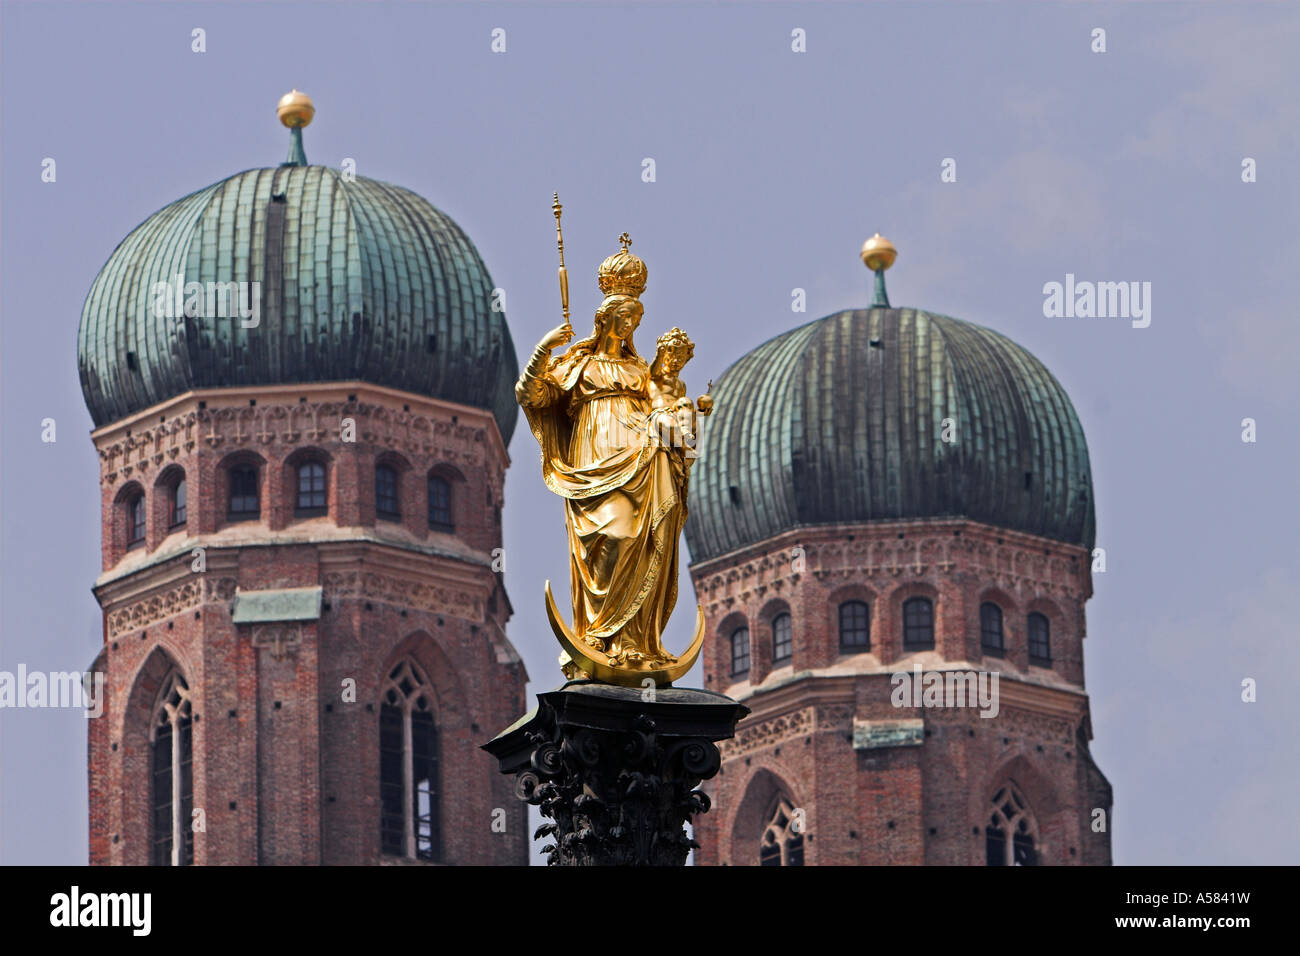 Steeples and golden statue, Munich, Bavaria, Germany Stock Photo